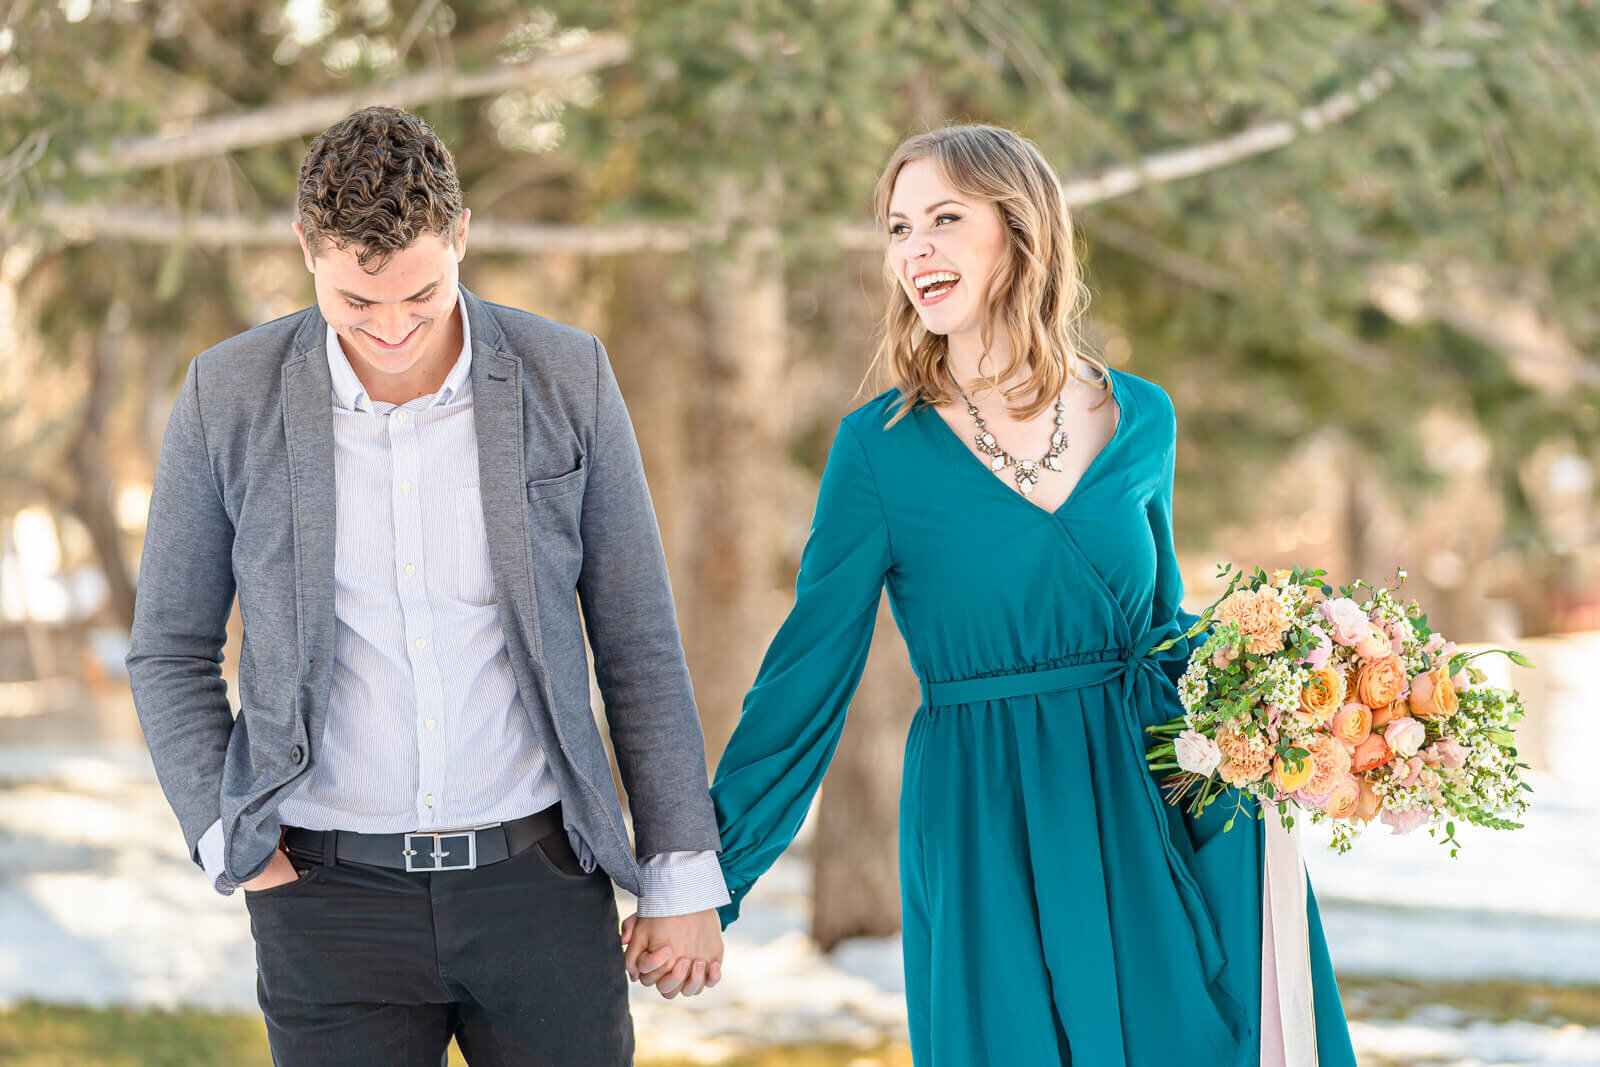 Utah engagement photography of a man in a white button-up shirt and a gray blazer holding hands with his fiancee wearing a long sleeved dark teal dress, holding a bouquet of orange and pink roses while walking in a park in Salt Lake City